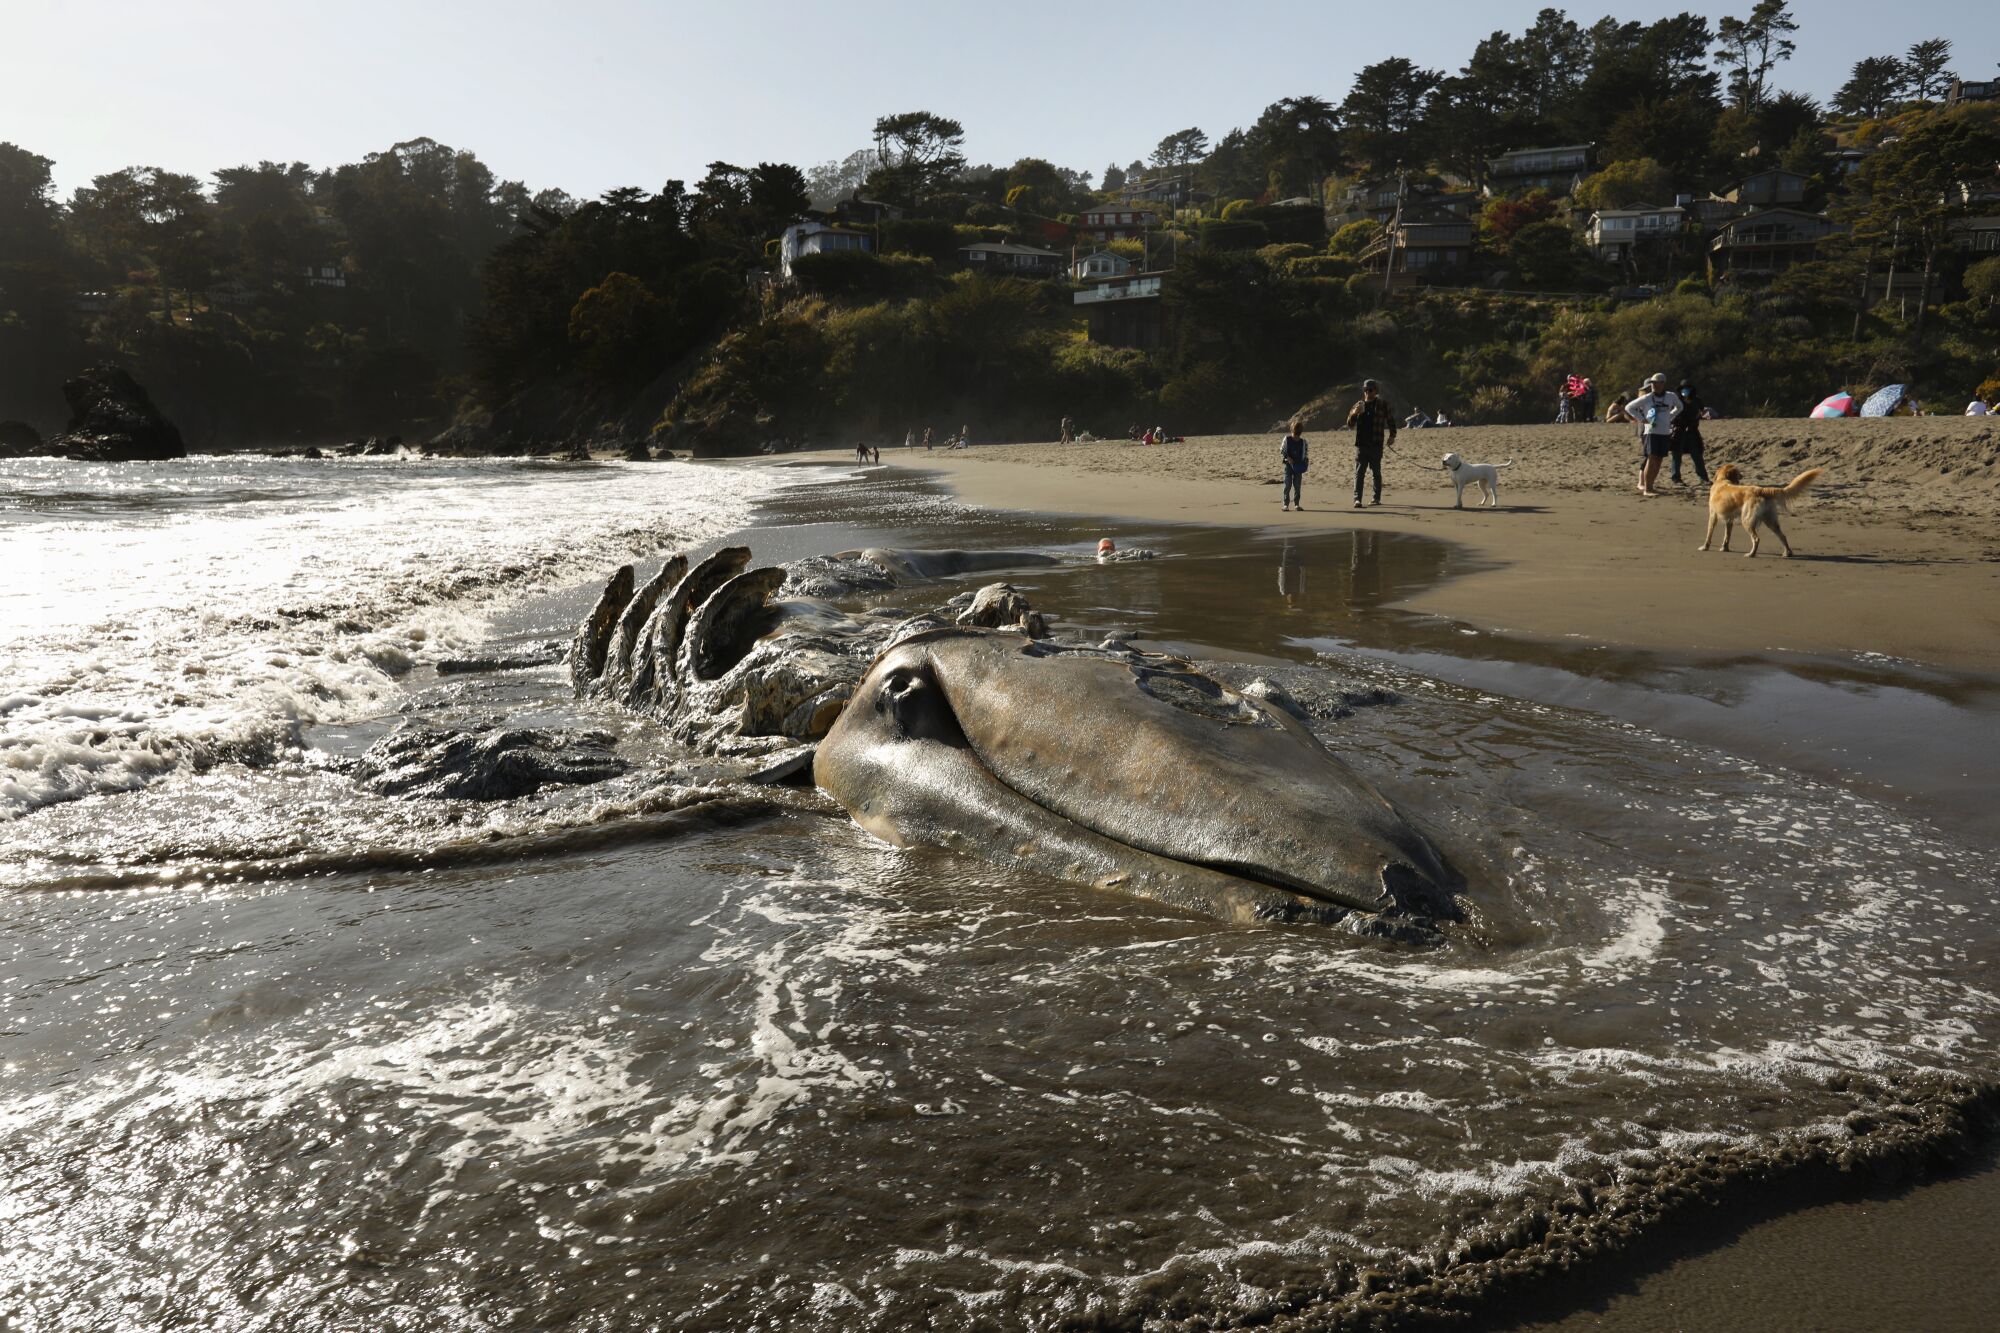 In May 2021, three gray whales washed ashore in the San Francisco Bay Area